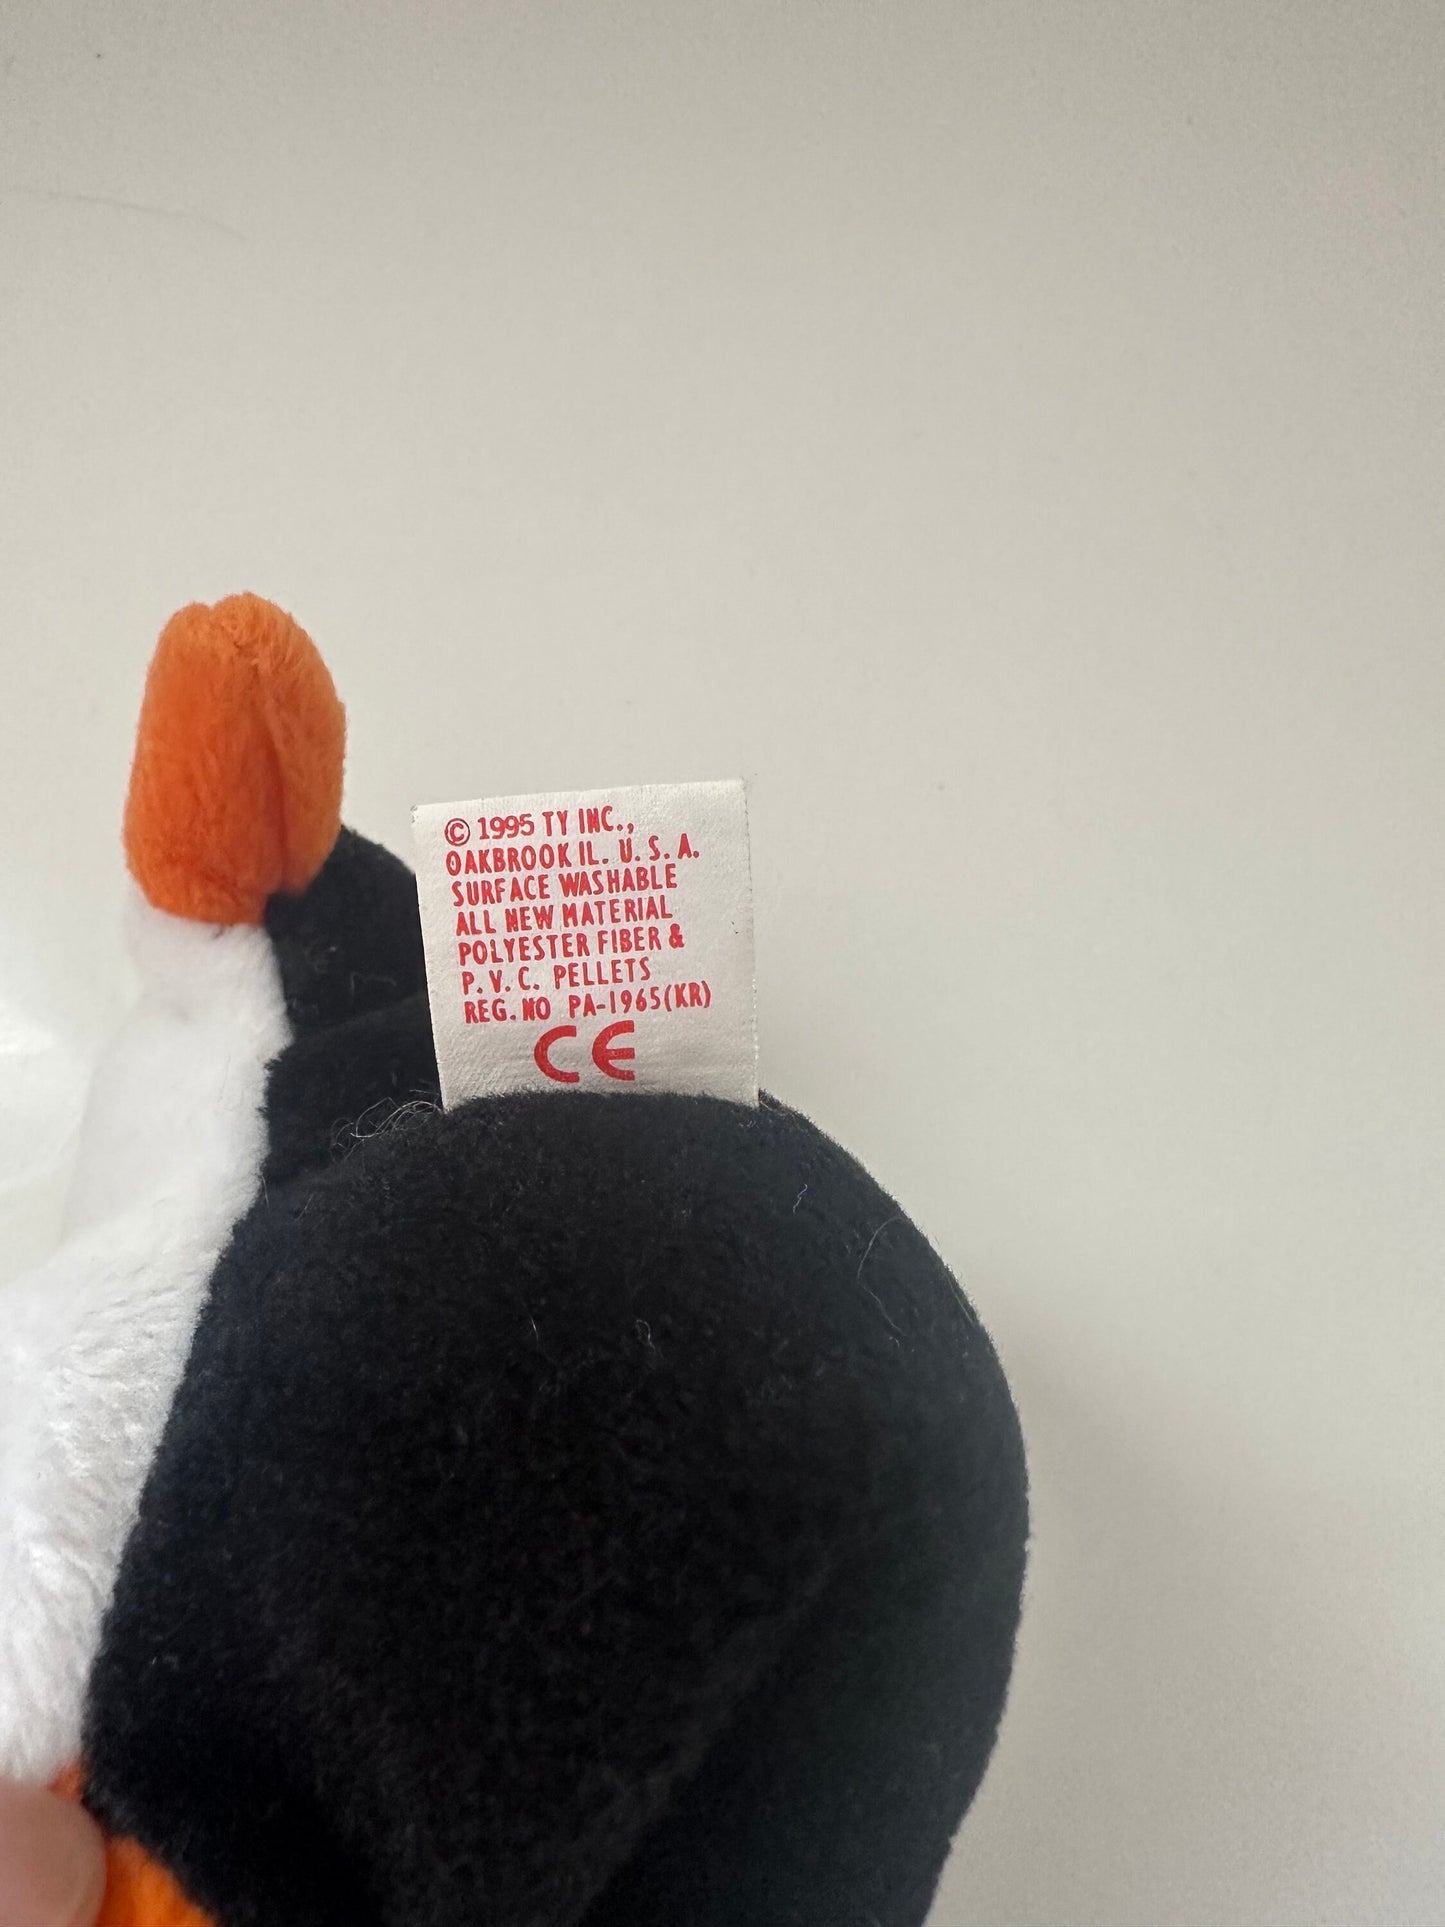 TY Beanie Baby “Waddle” the Penguin - 2nd Gen Tush Tag, No Hang Tag! (6 inch)